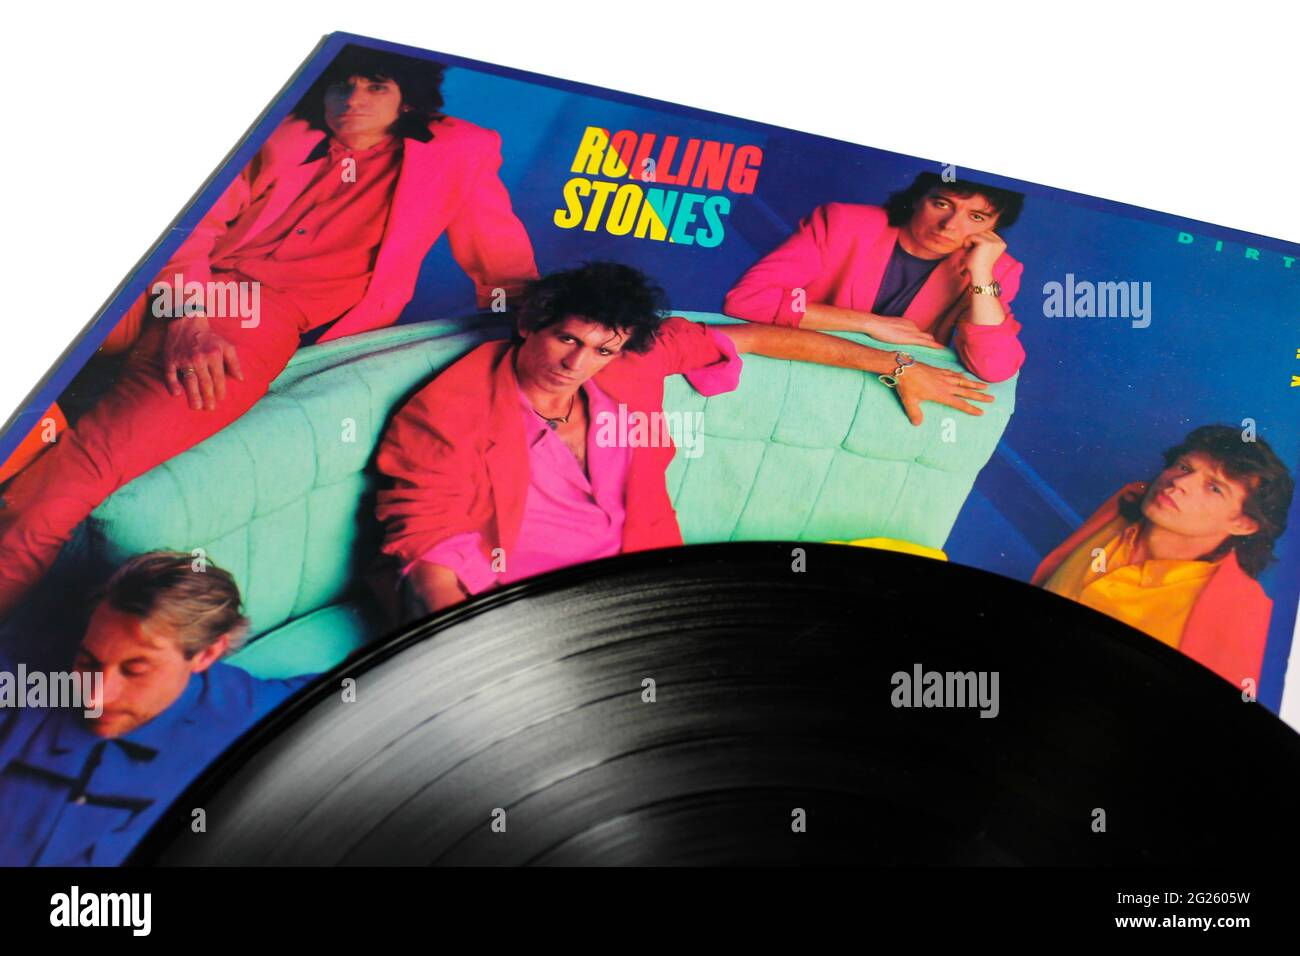 English rock band, The Rolling Stones music album on vinyl record LP disc. Titled: Dirty Work album cover Stock Photo